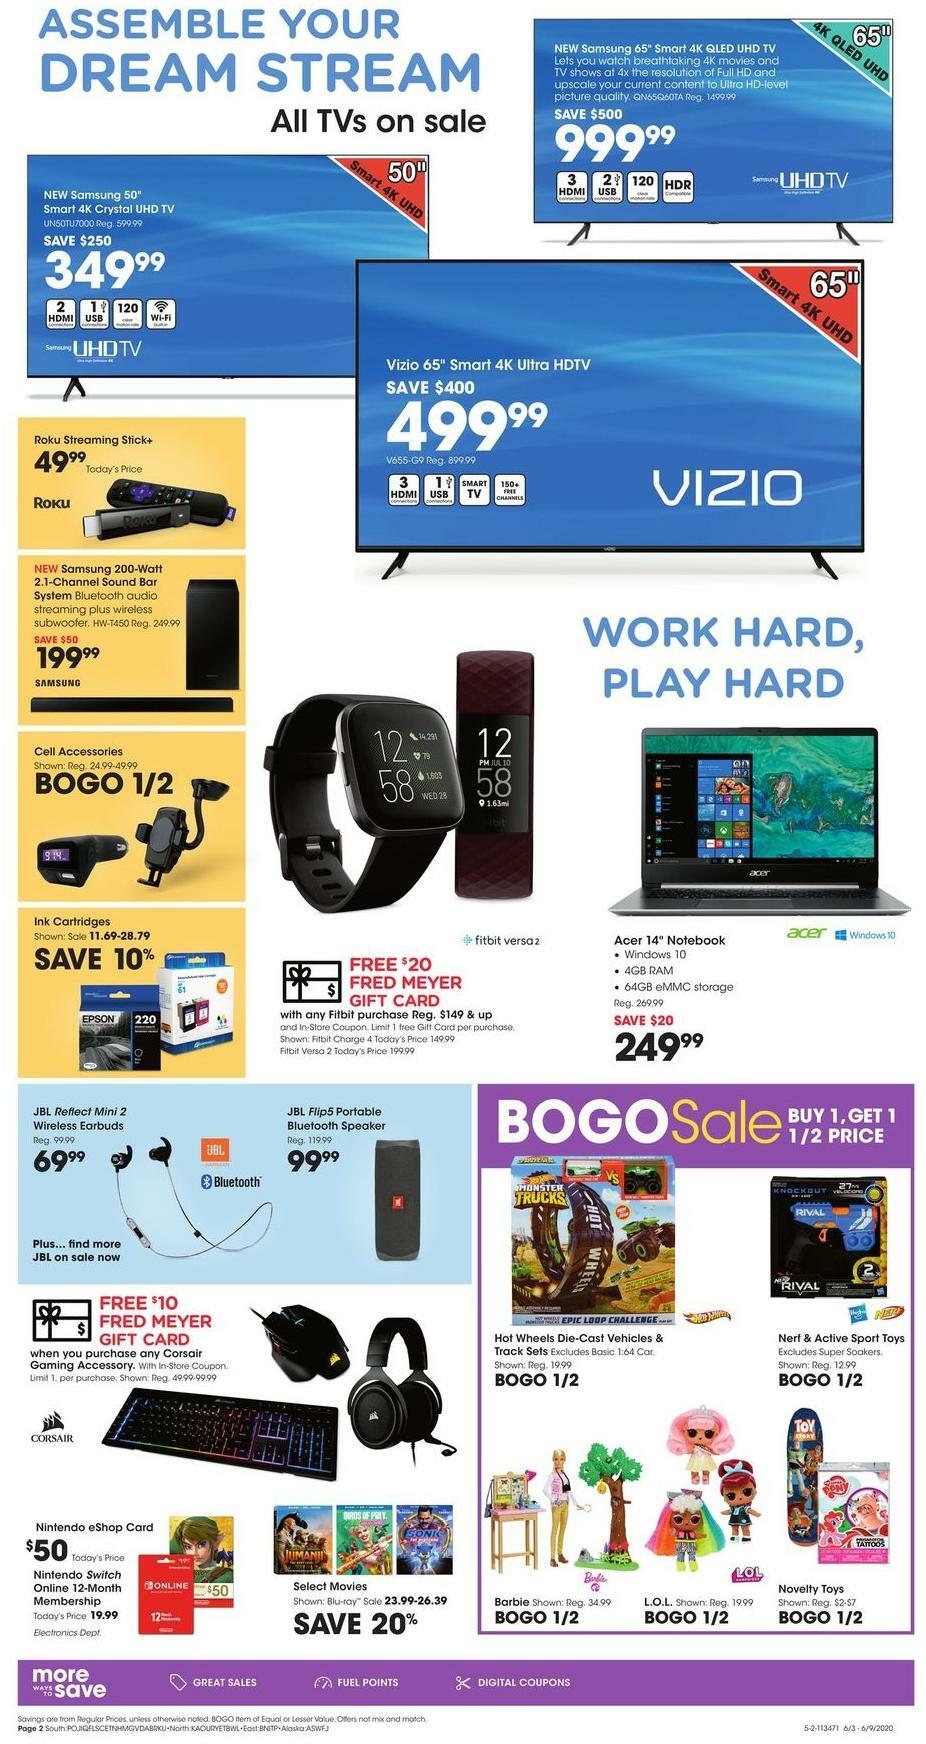 Fred Meyer General Merchandise Weekly Ad from June 3